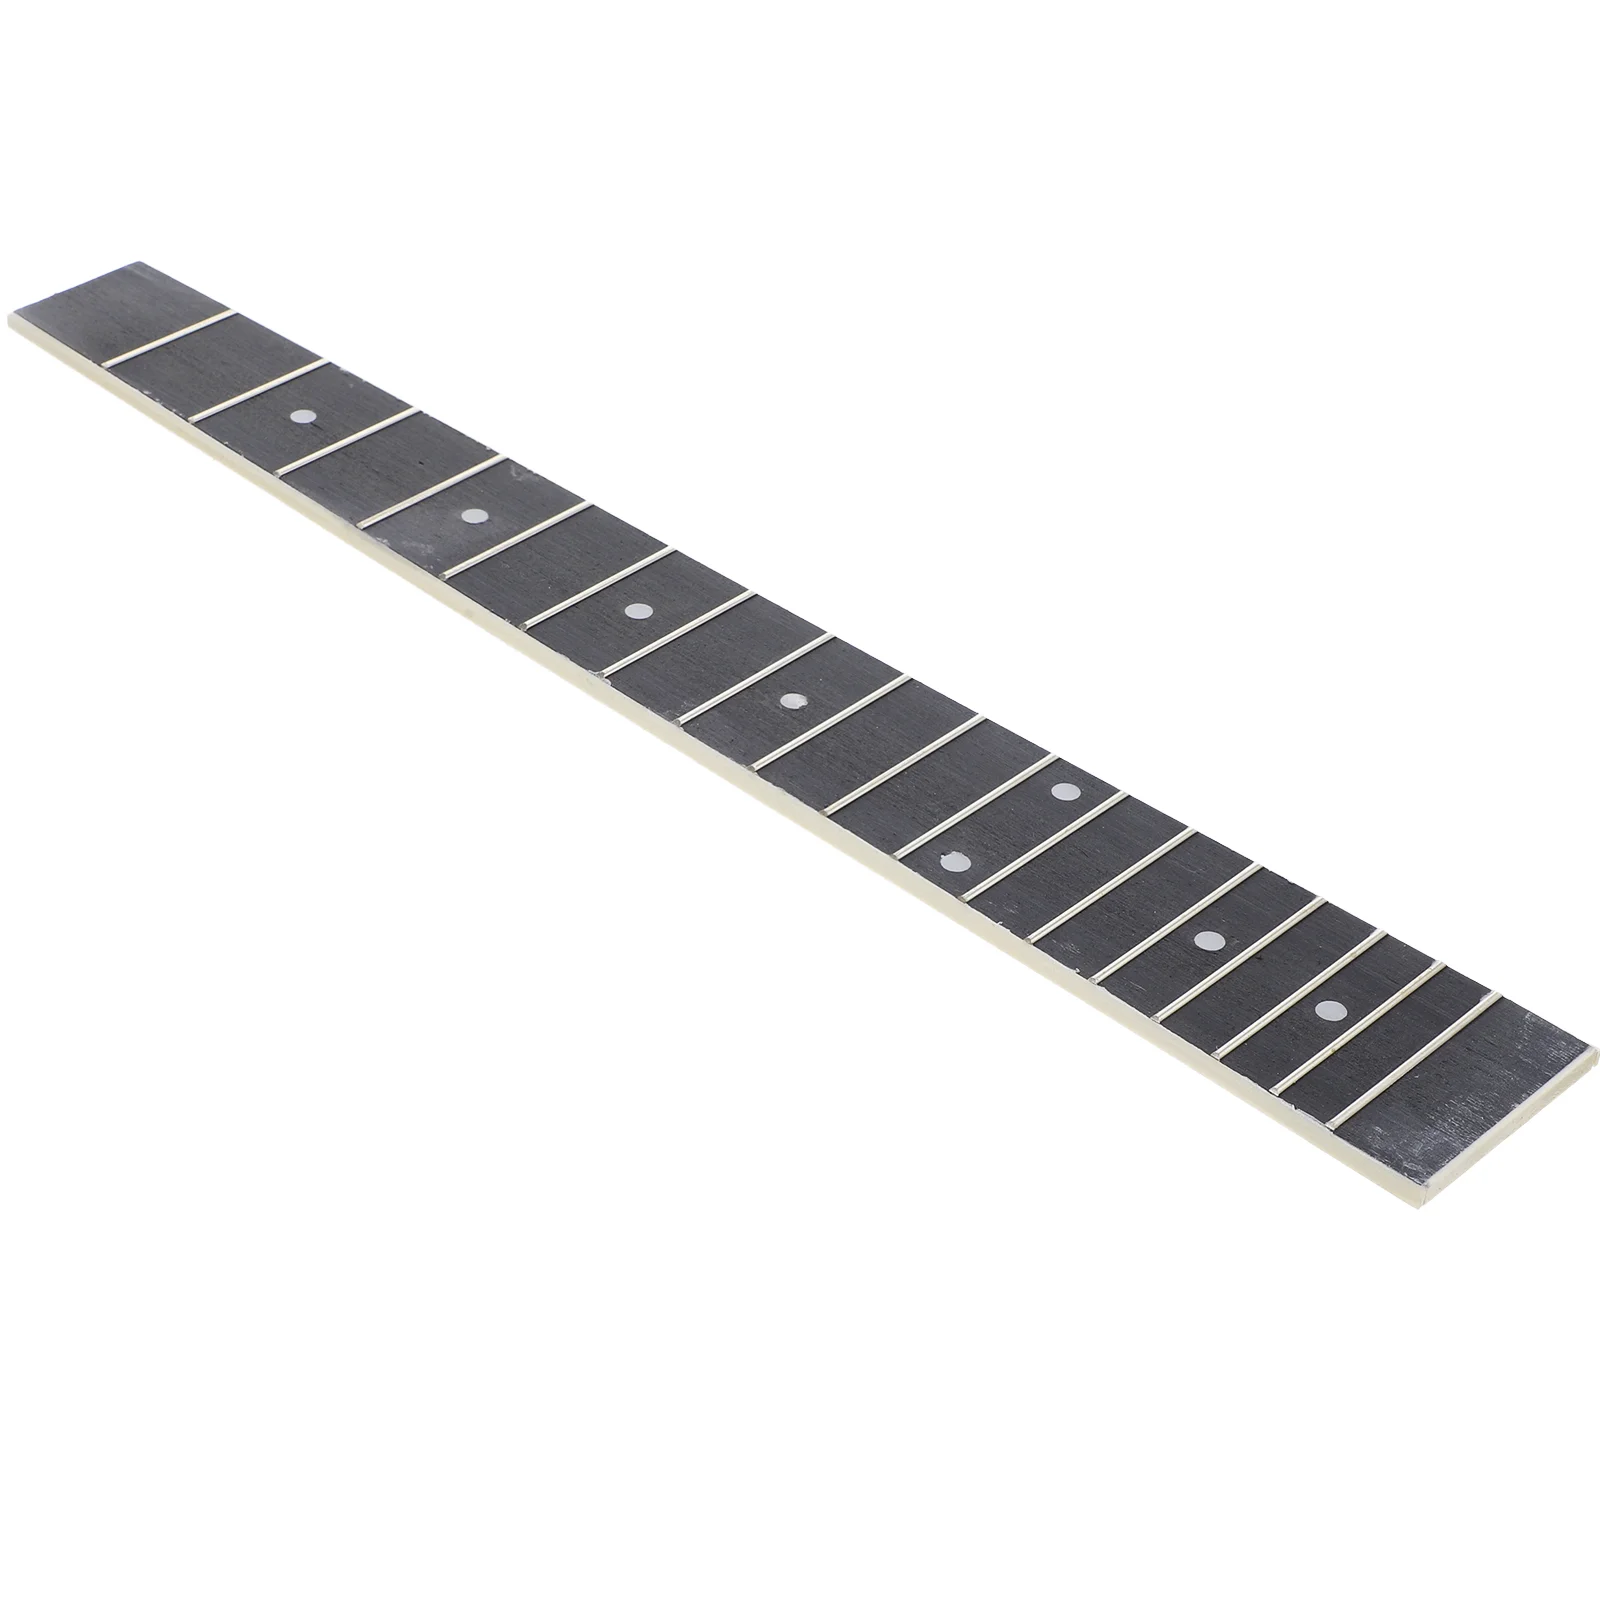 

Guitar Wood Fingerboard Plastic Folk Fretboard Technical Wooden Replace Plate Replacement Parts Acoustic Ukulele Neck